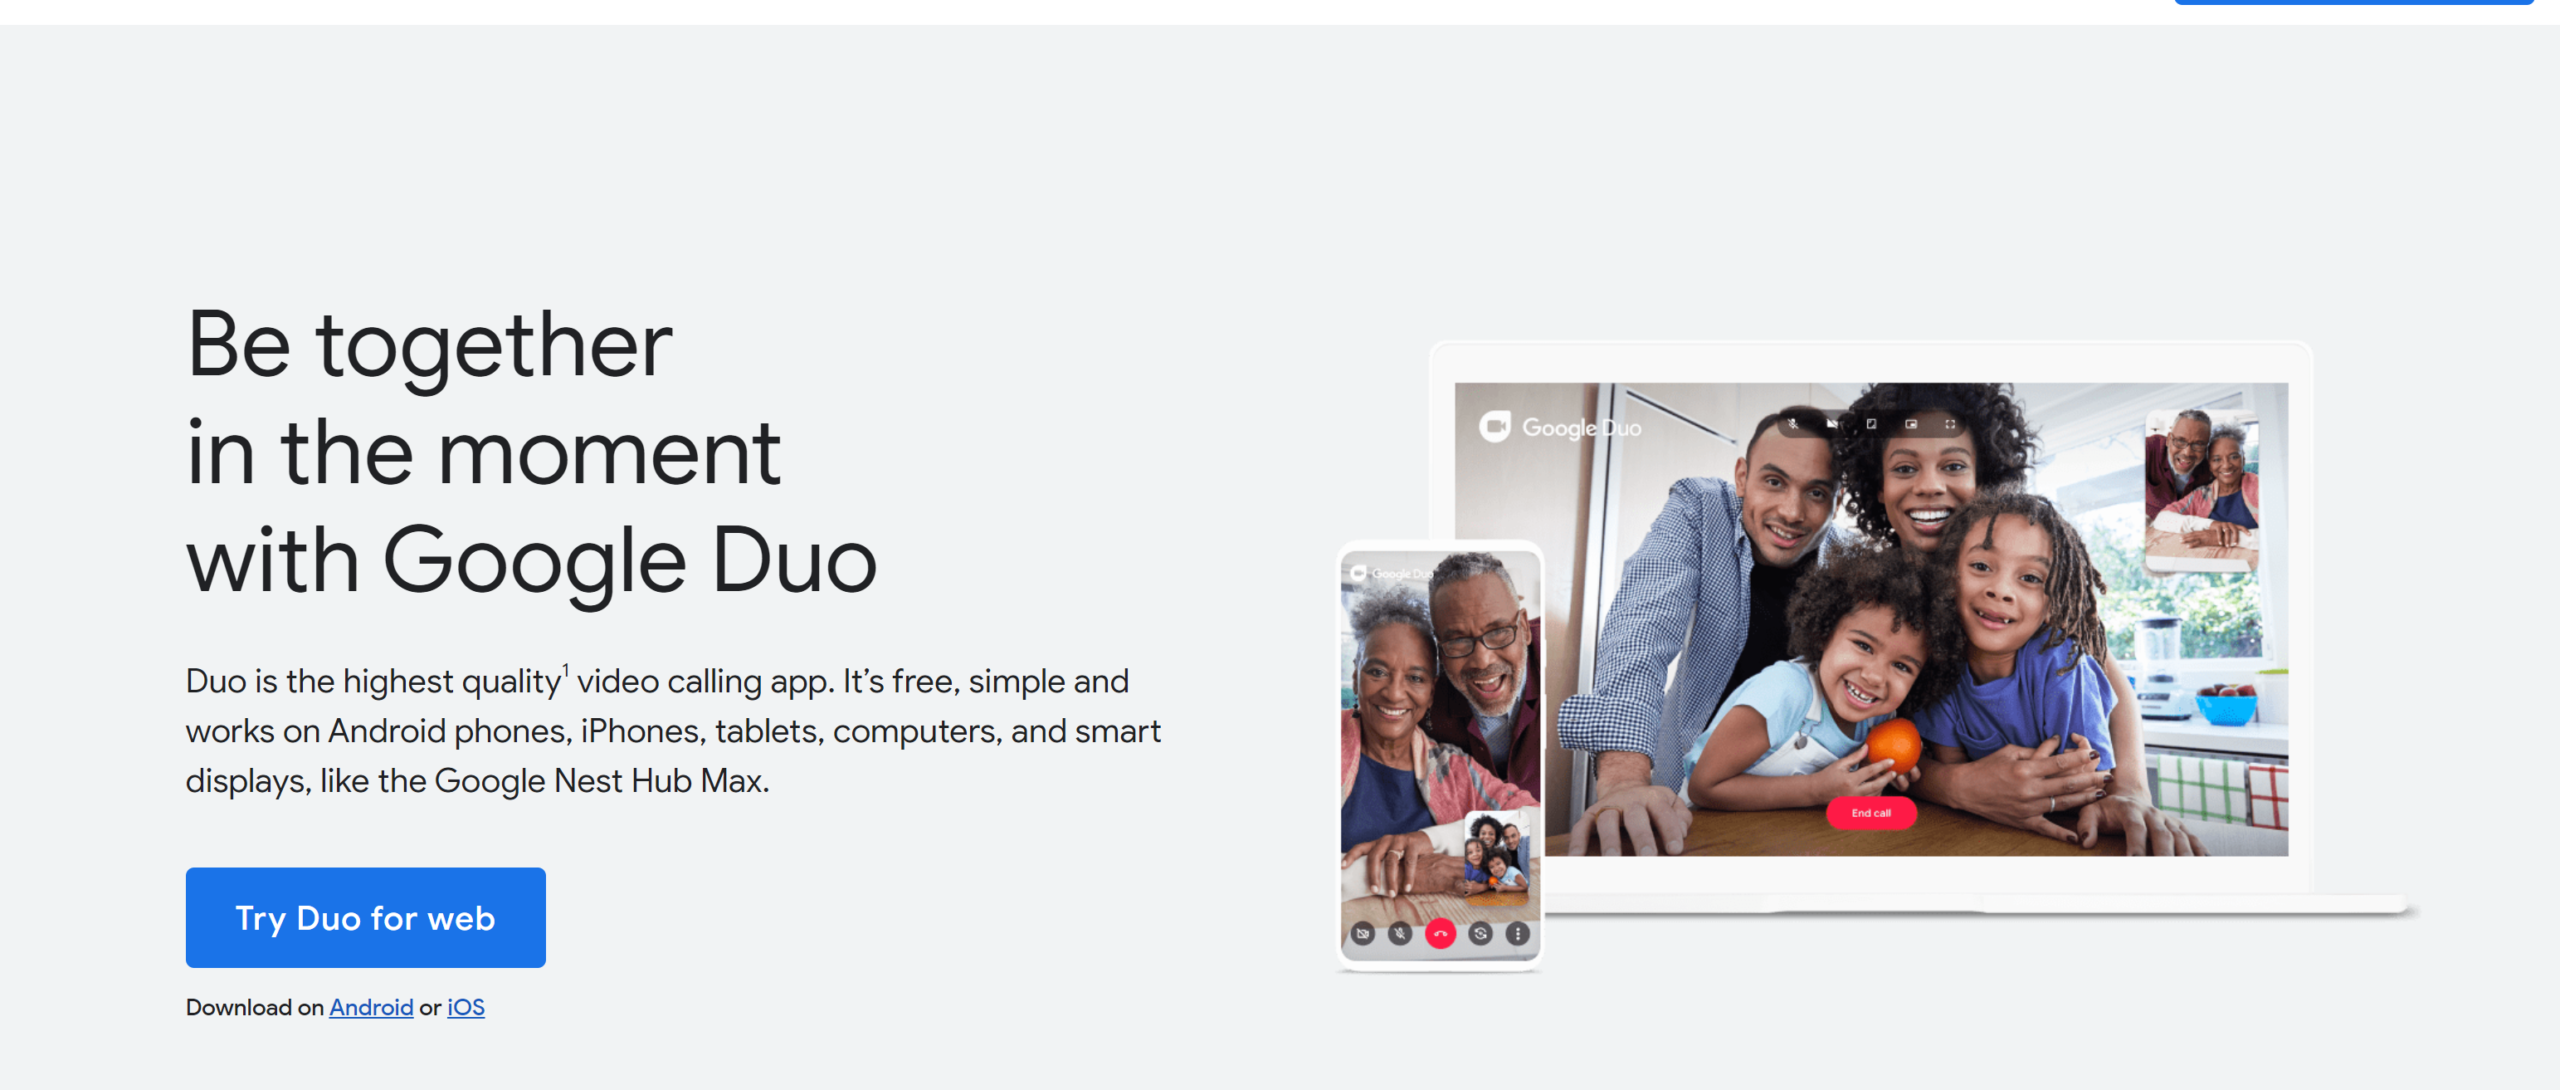 THE GOOGLE DUO CHAT APP